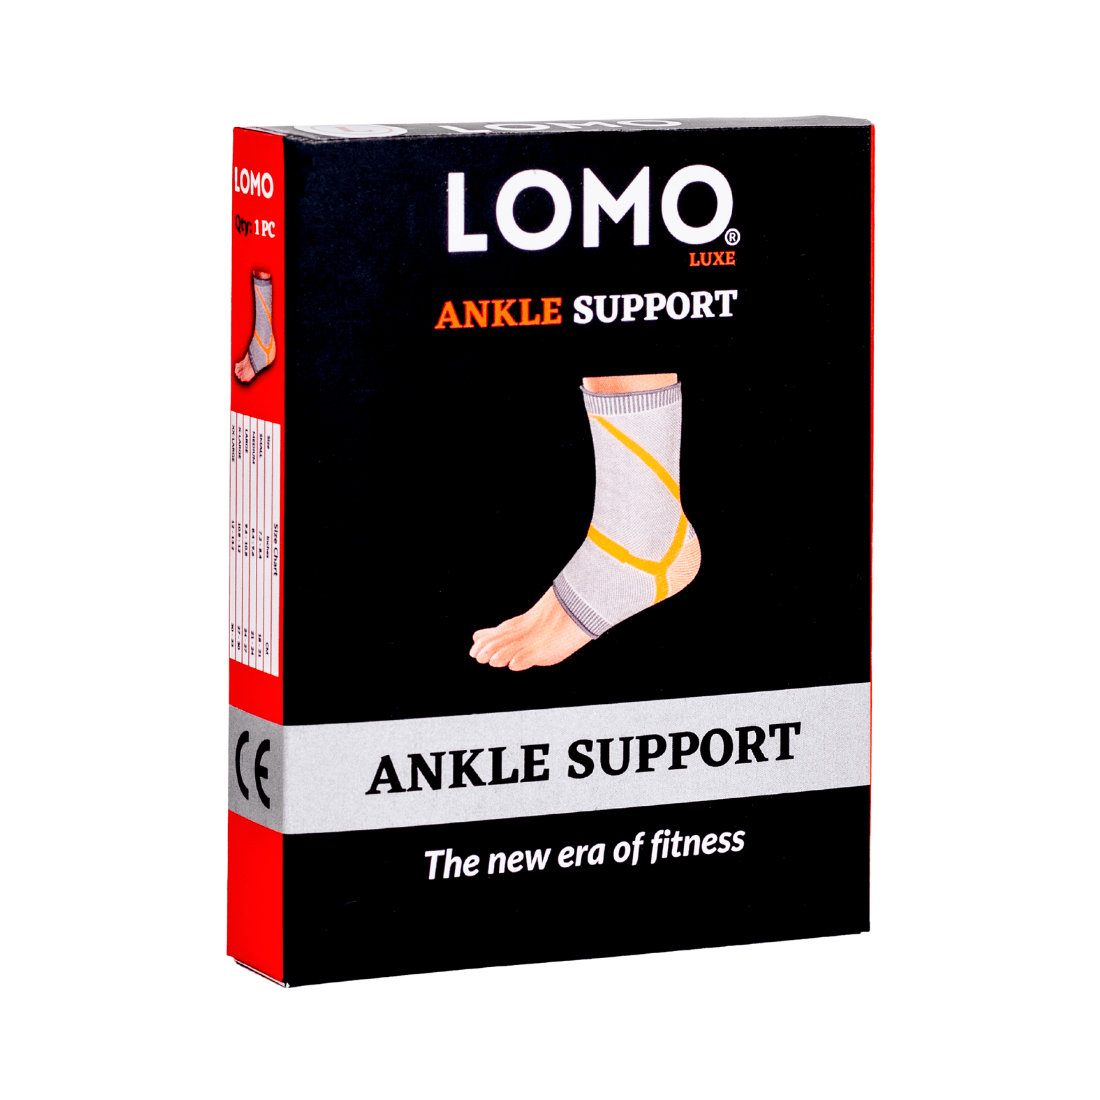 LOMO Luxe Ankle Support LOMO